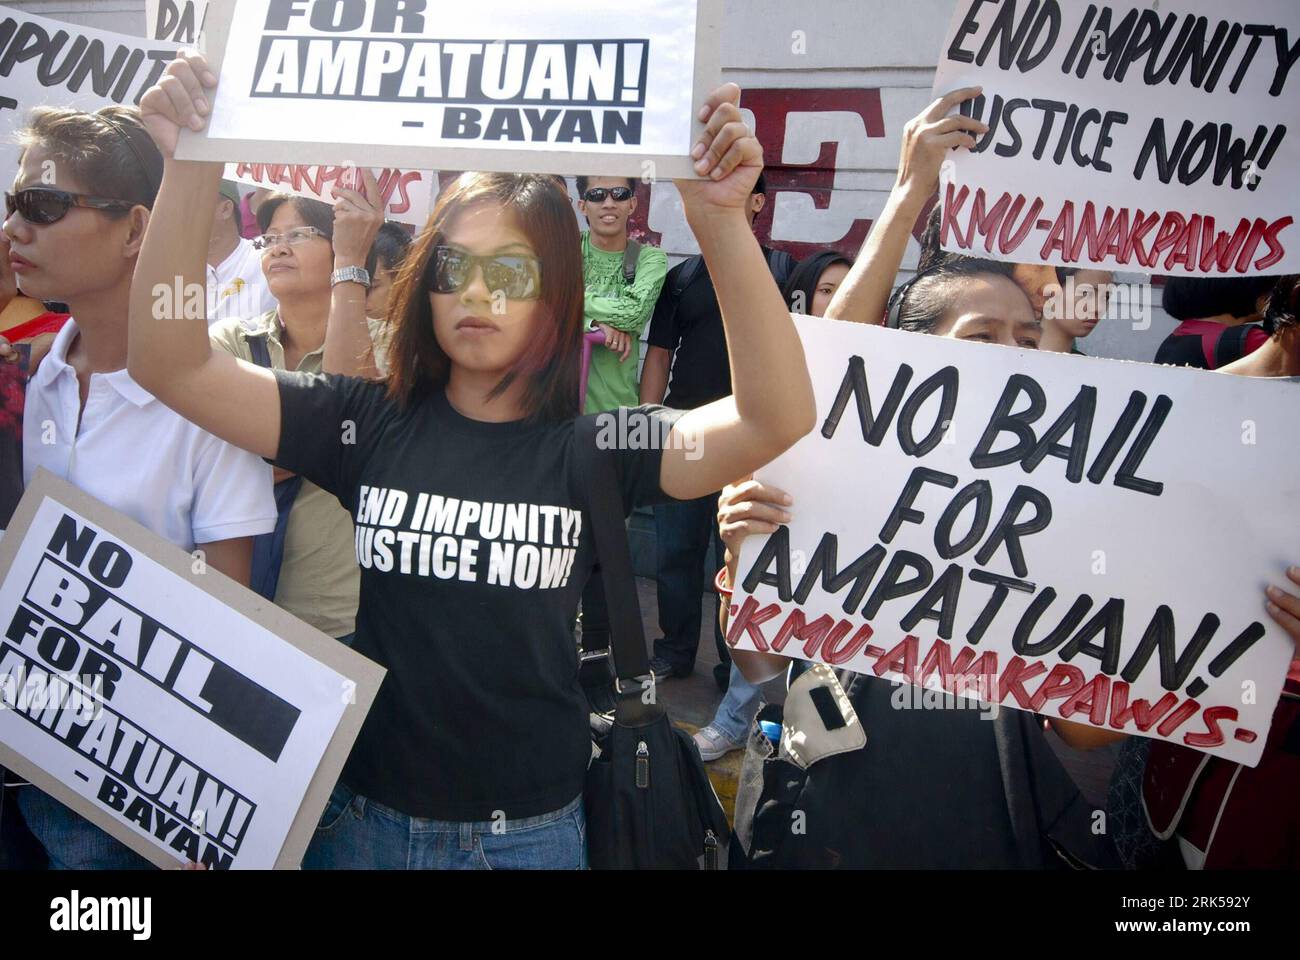 Bildnummer: 53724066  Datum: 13.01.2010  Copyright: imago/Xinhua Protesters hold placards with slogans during a rally calling for justice for victims of Maguindanao massacre in front of the Philippine National Police (PNP) Headquarters in Quezon City northeast of Manila, the Philippines, Jan. 13, 2010. The second hearing of Andal Ampatuan, Jr., the principal accussed in the Maguindanao massacre in Mindanao was held here on Wednesday, and a witness testified that he saw a member of a powerful clan and his relatives firing their guns as journalists and women among 57 victims knelt and begged for Stock Photo